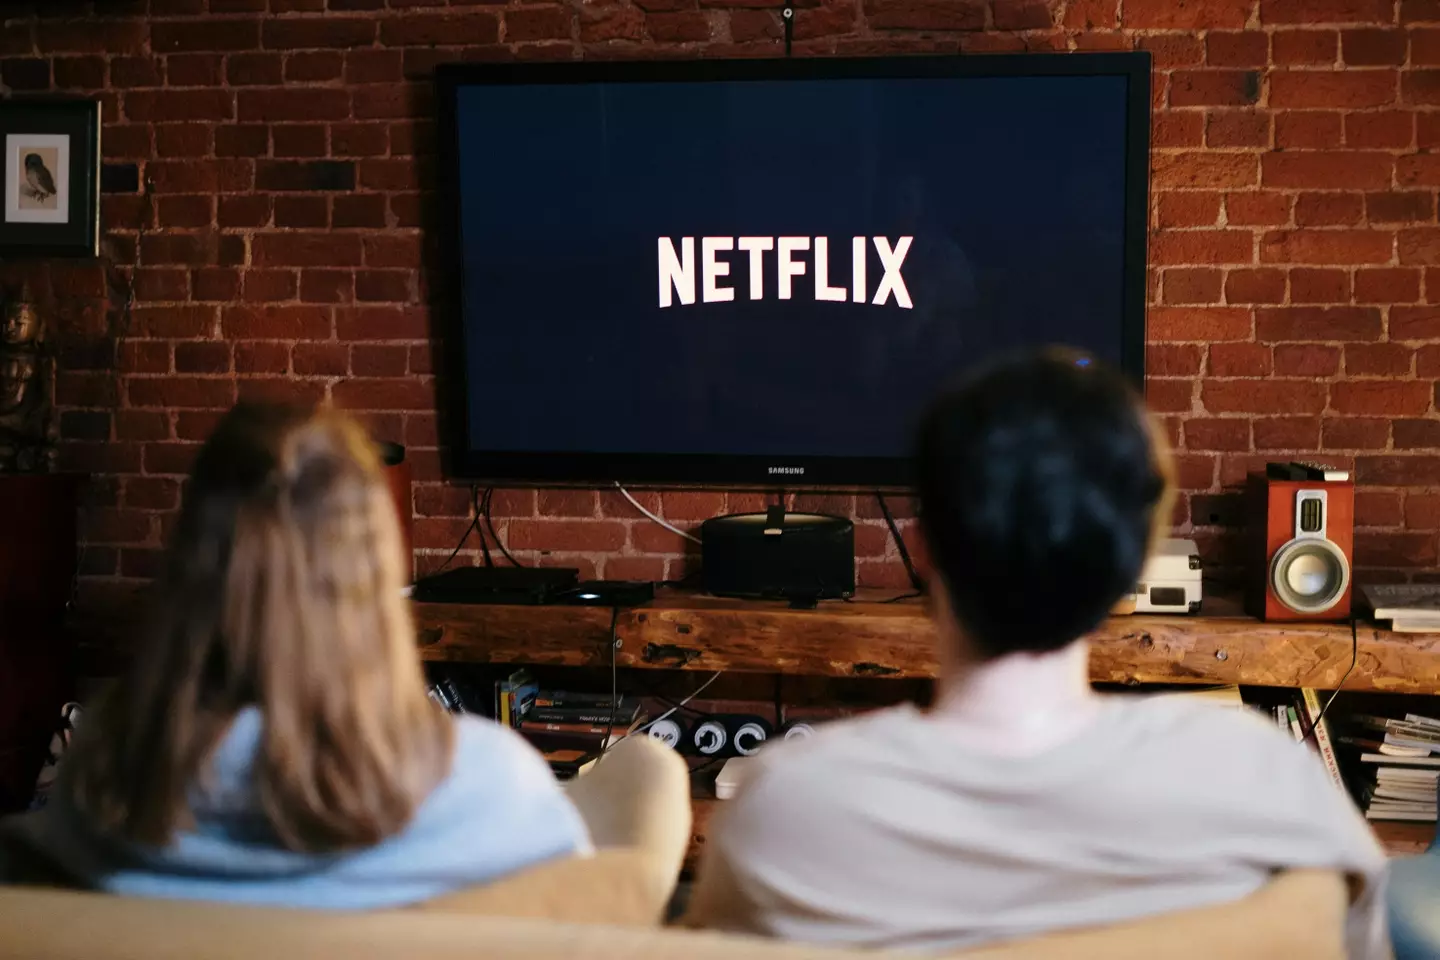 Netflix streaming has completely changed the way we consume media in the modern era. (Pexels/cottonbro studio)